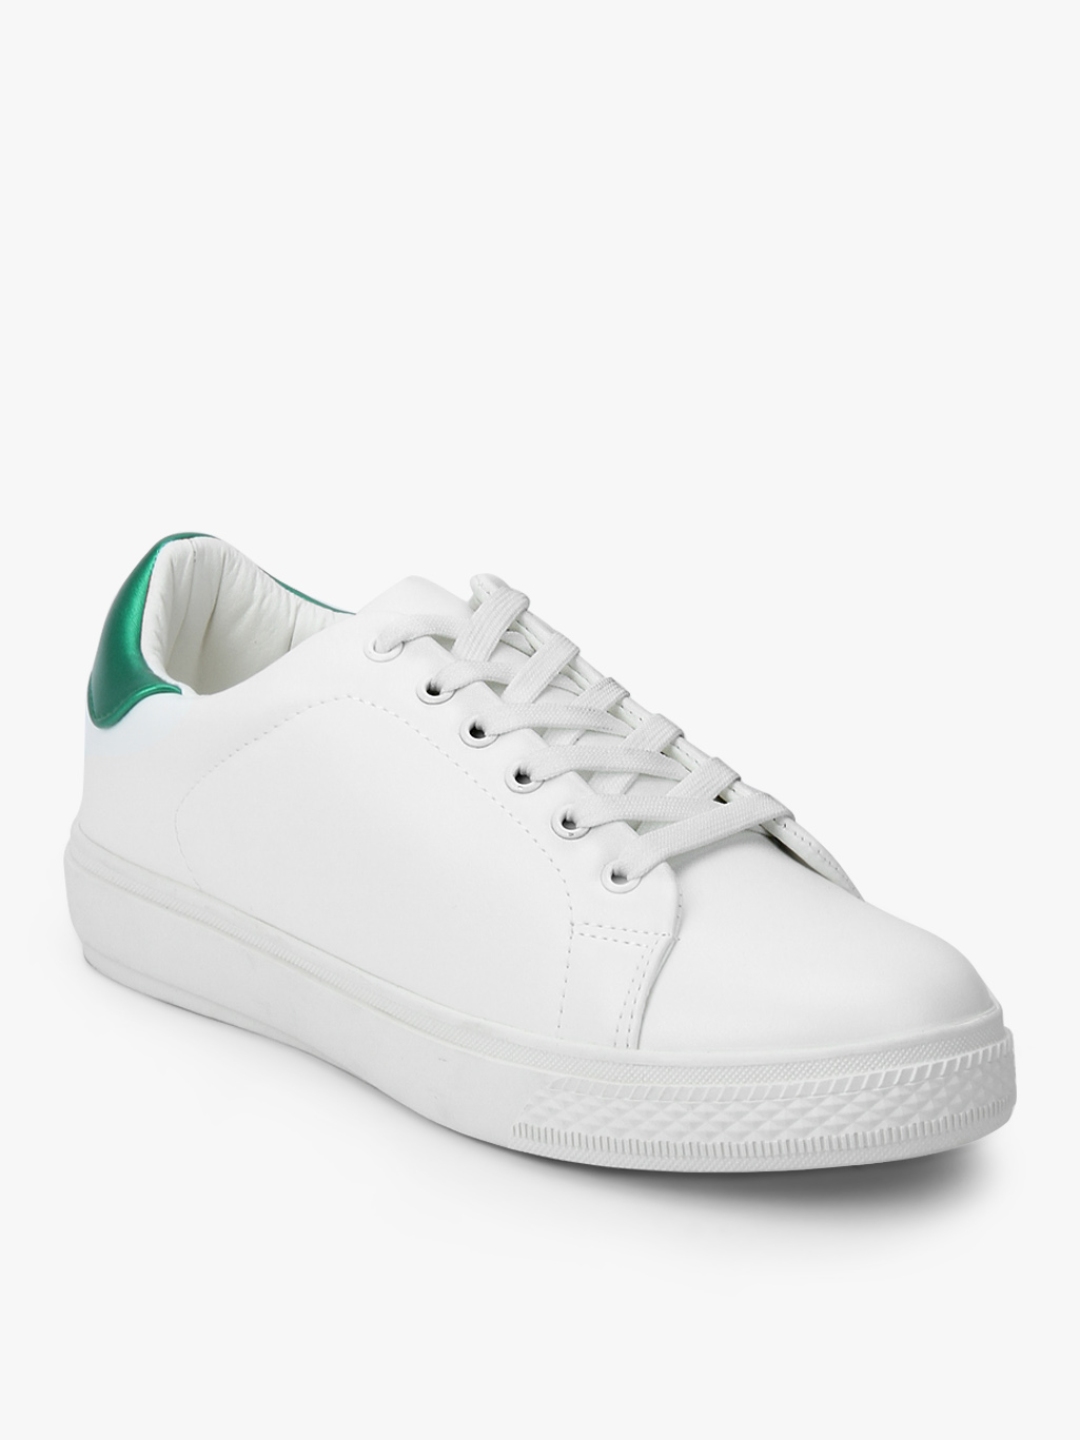 Buy Lee Cooper Women White Sneakers - Casual Shoes for Women 4426351 ...